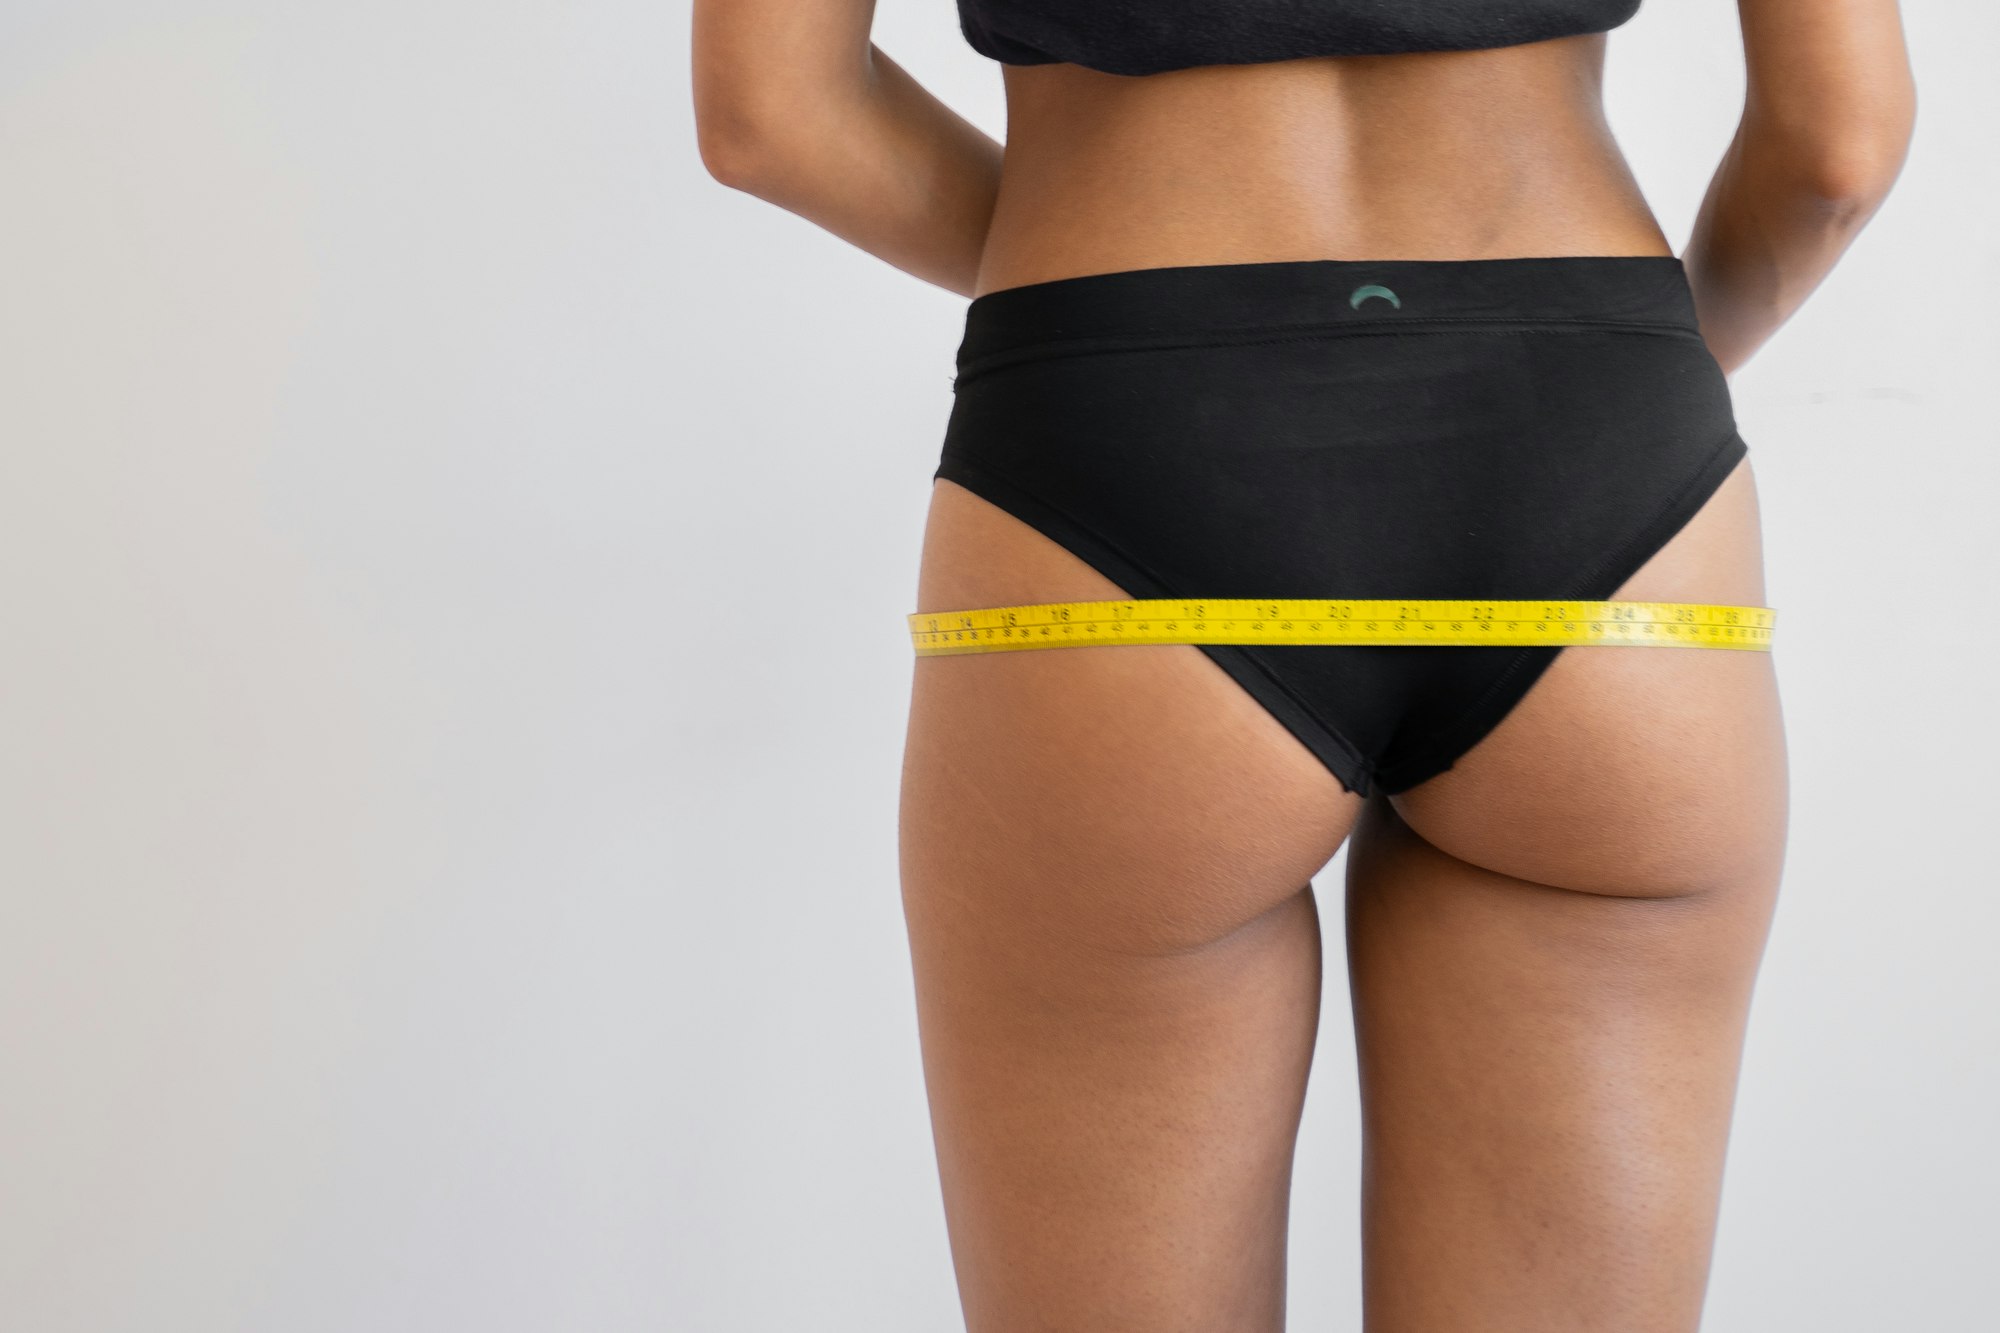 Measuring Tape - How to Measure Your Hips - Huha: Healthy Undies